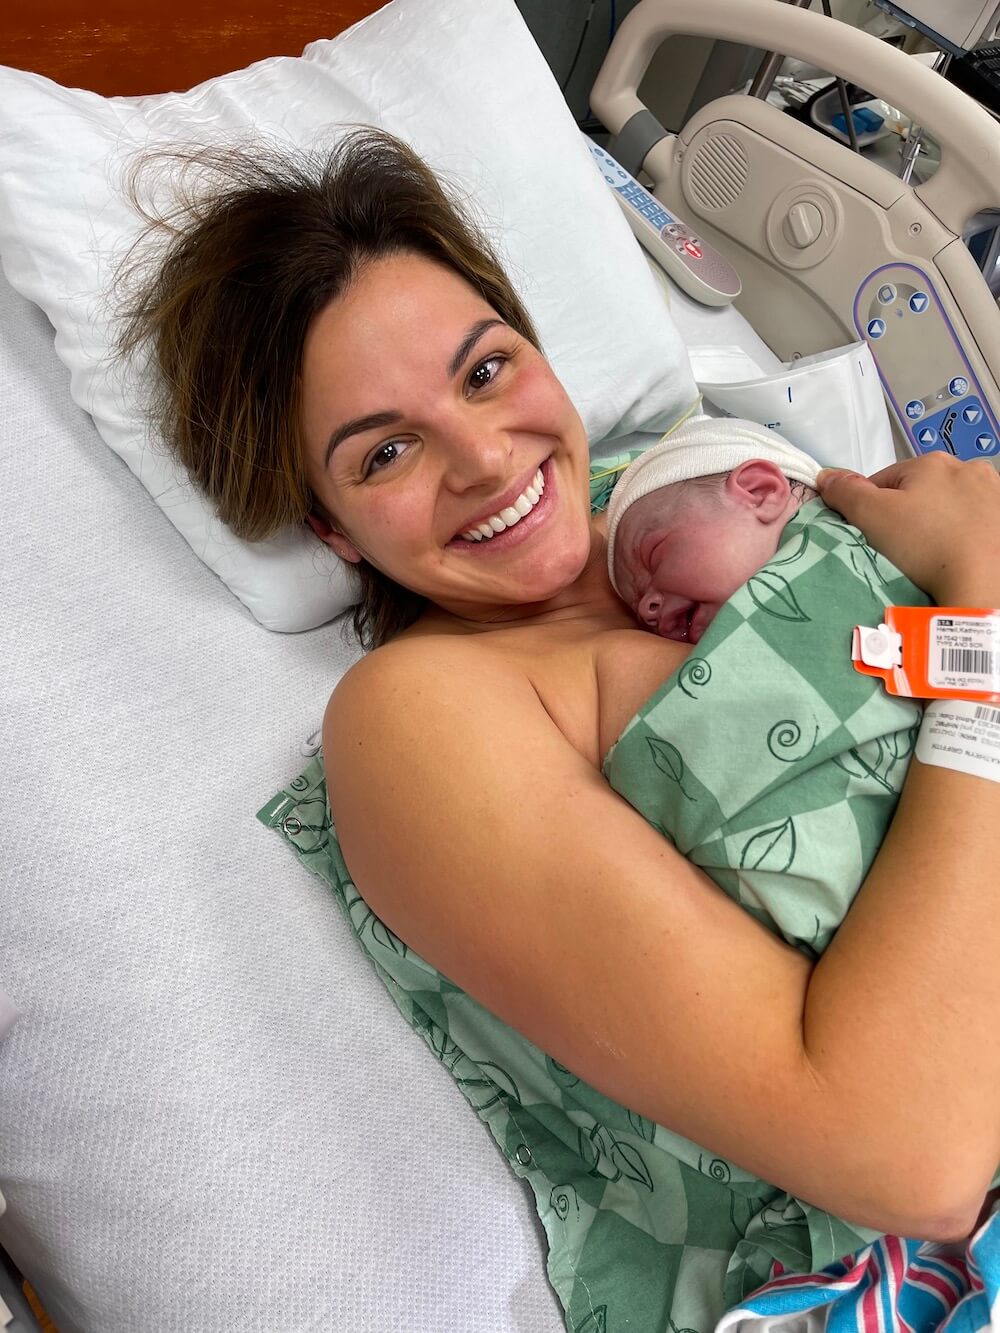 new mom and newborn baby in the hospital